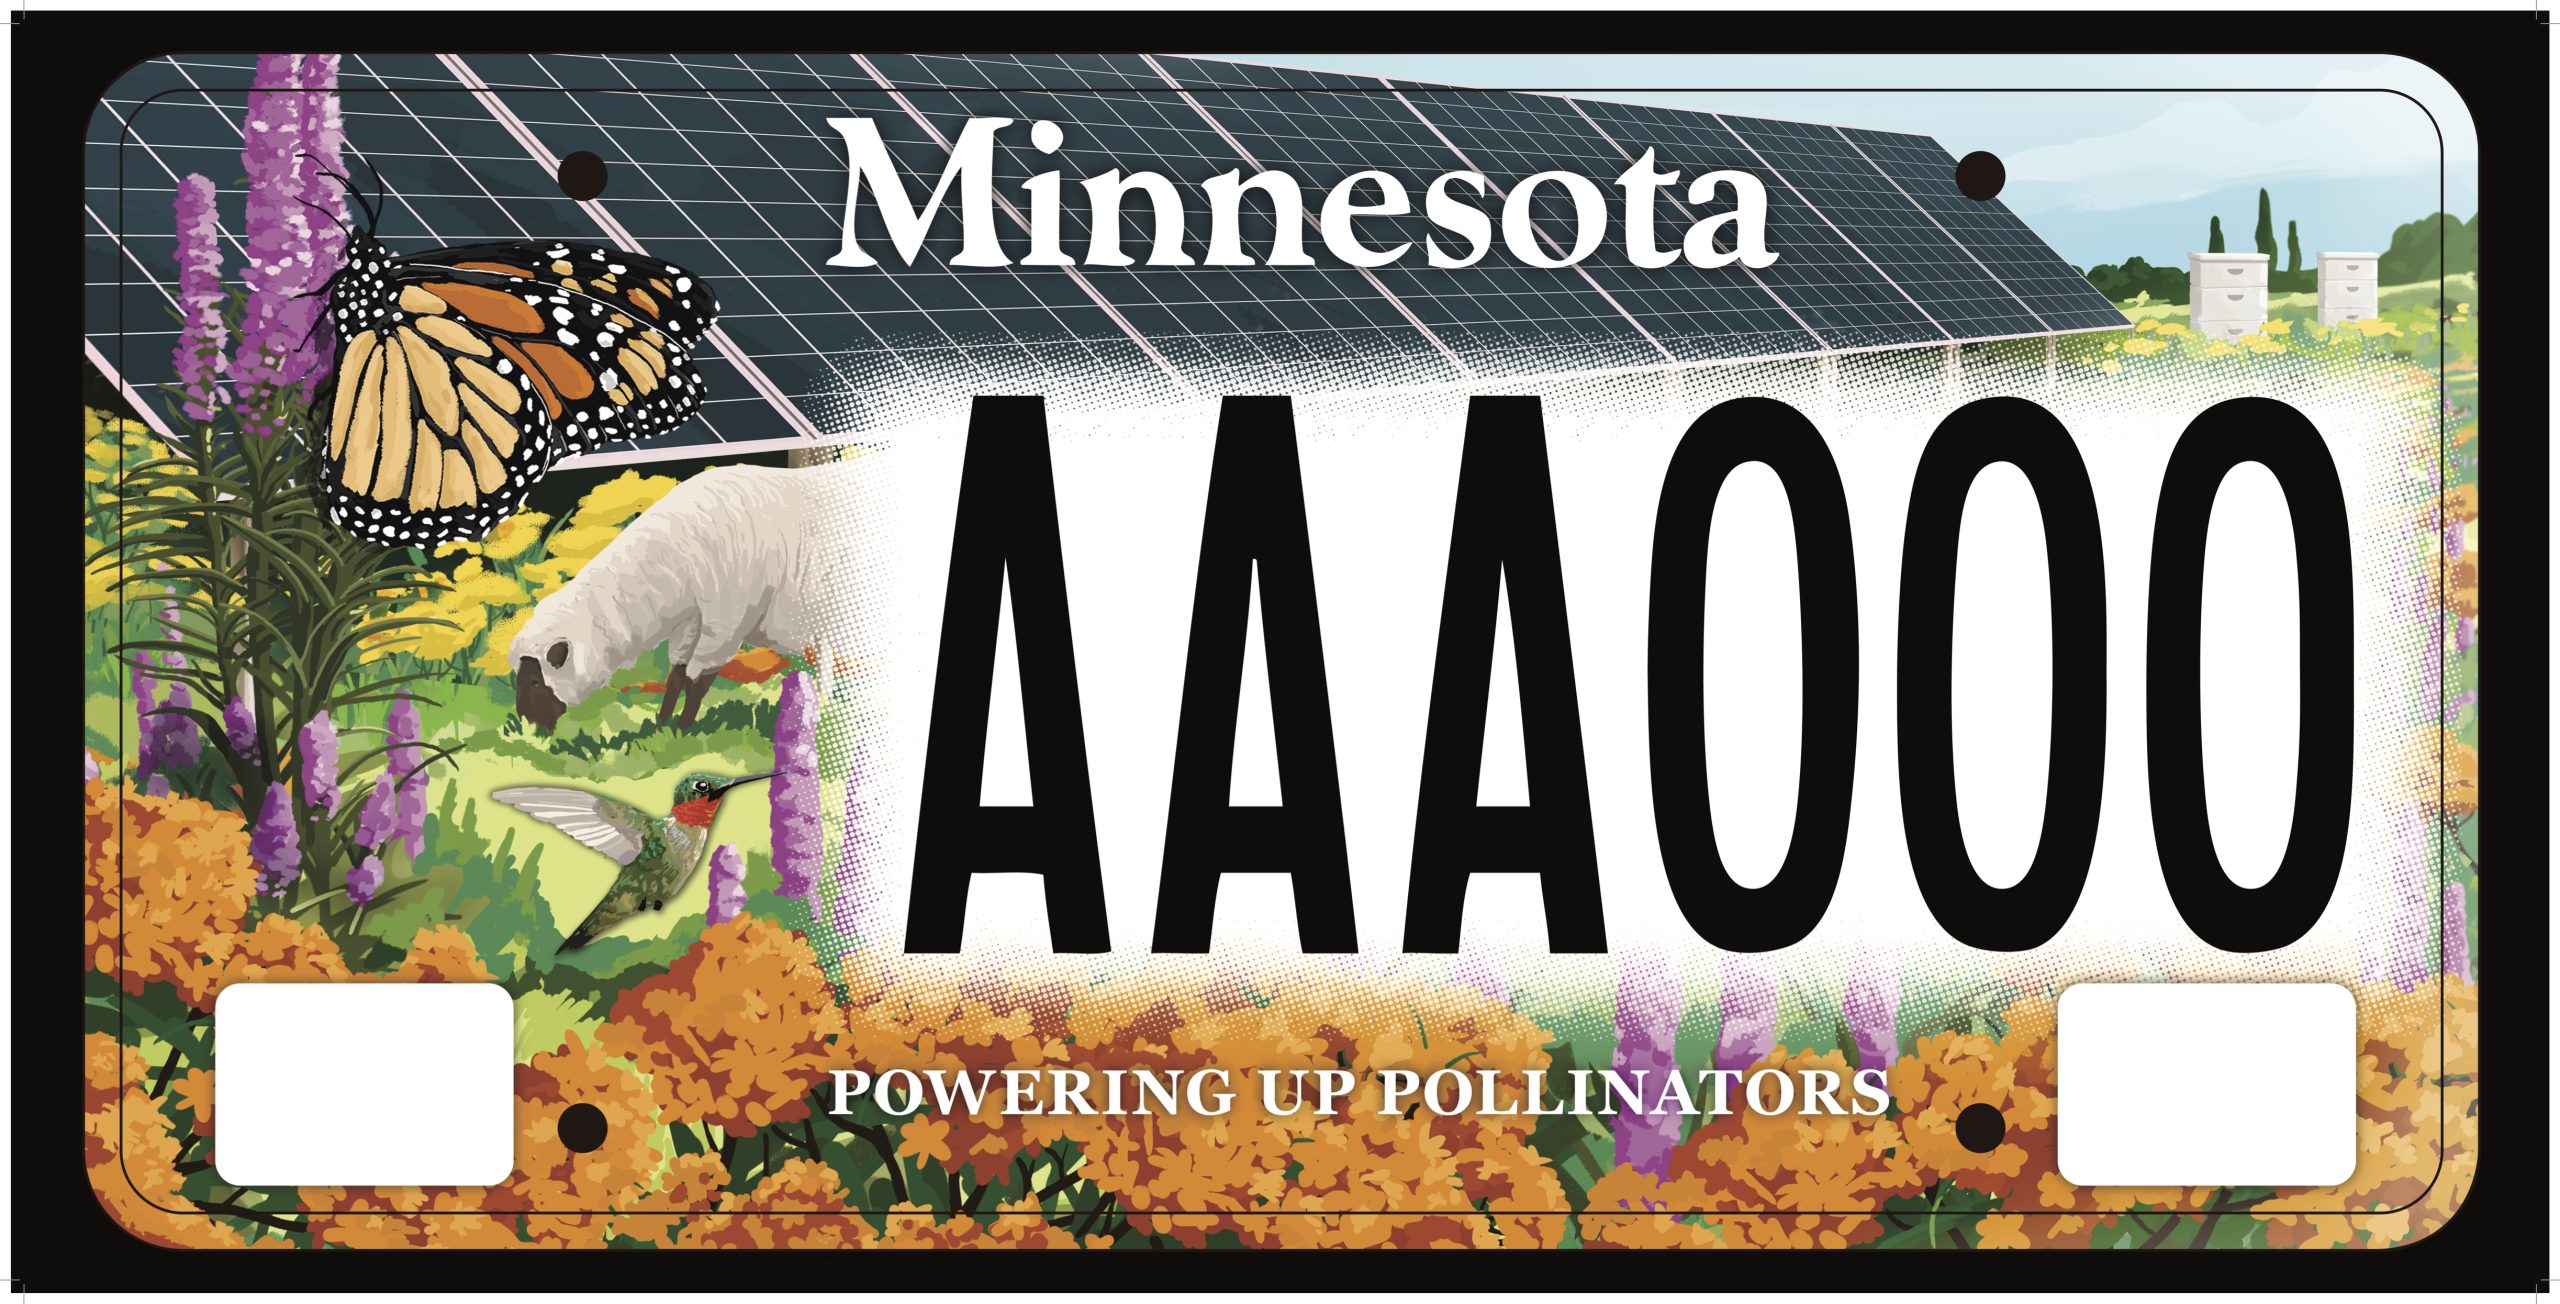 Commentary: This license plate will strengthen solar’s social license in Minnesota